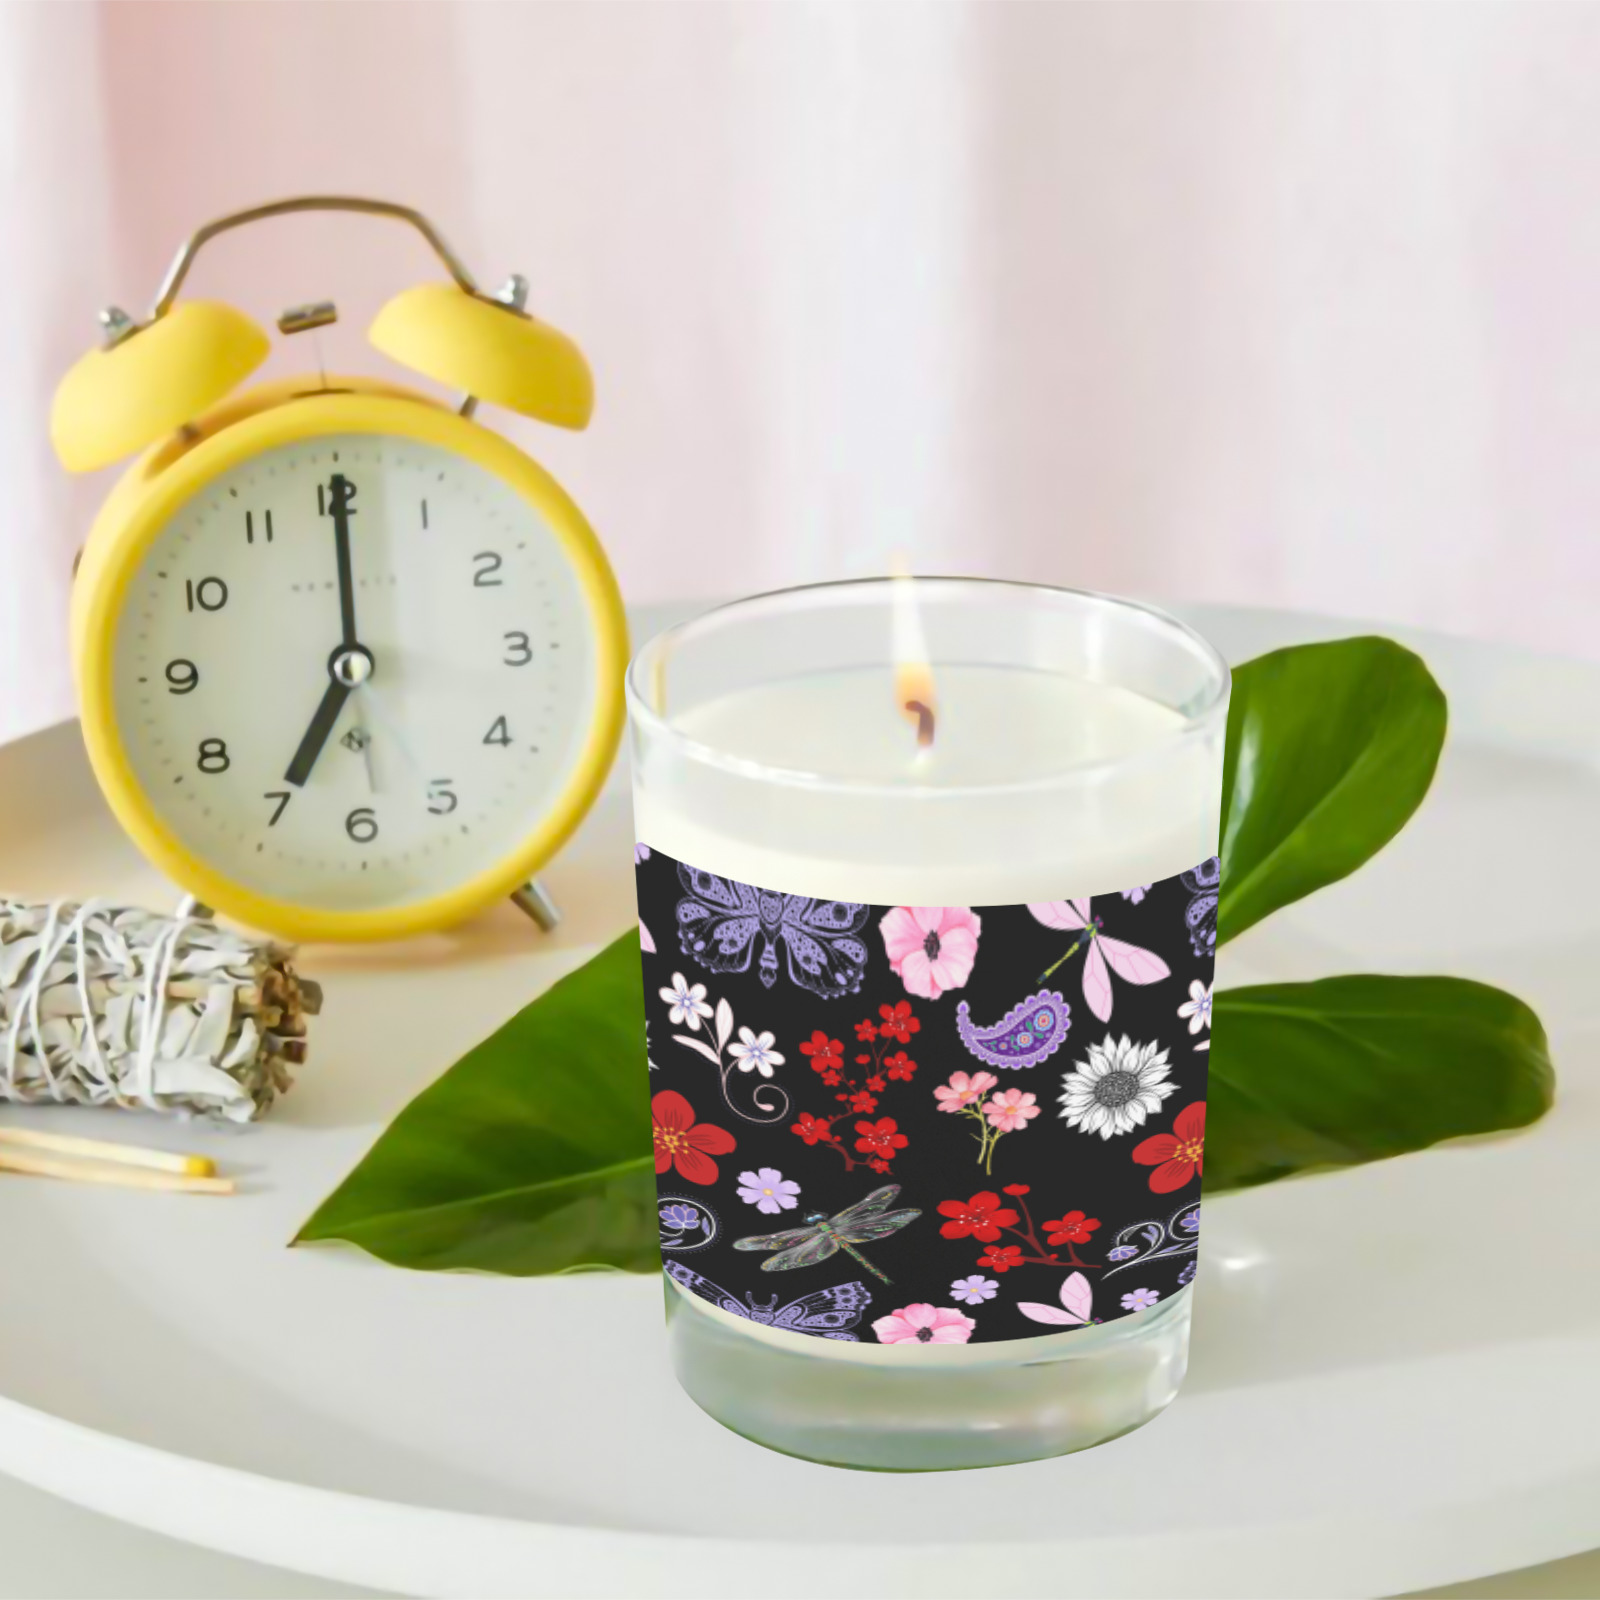 Black, Red, Pink, Purple, Dragonflies, Butterfly and Flowers Design Transparent Candle Cup Jasmine Transparent Candle Cup (Jasmine)